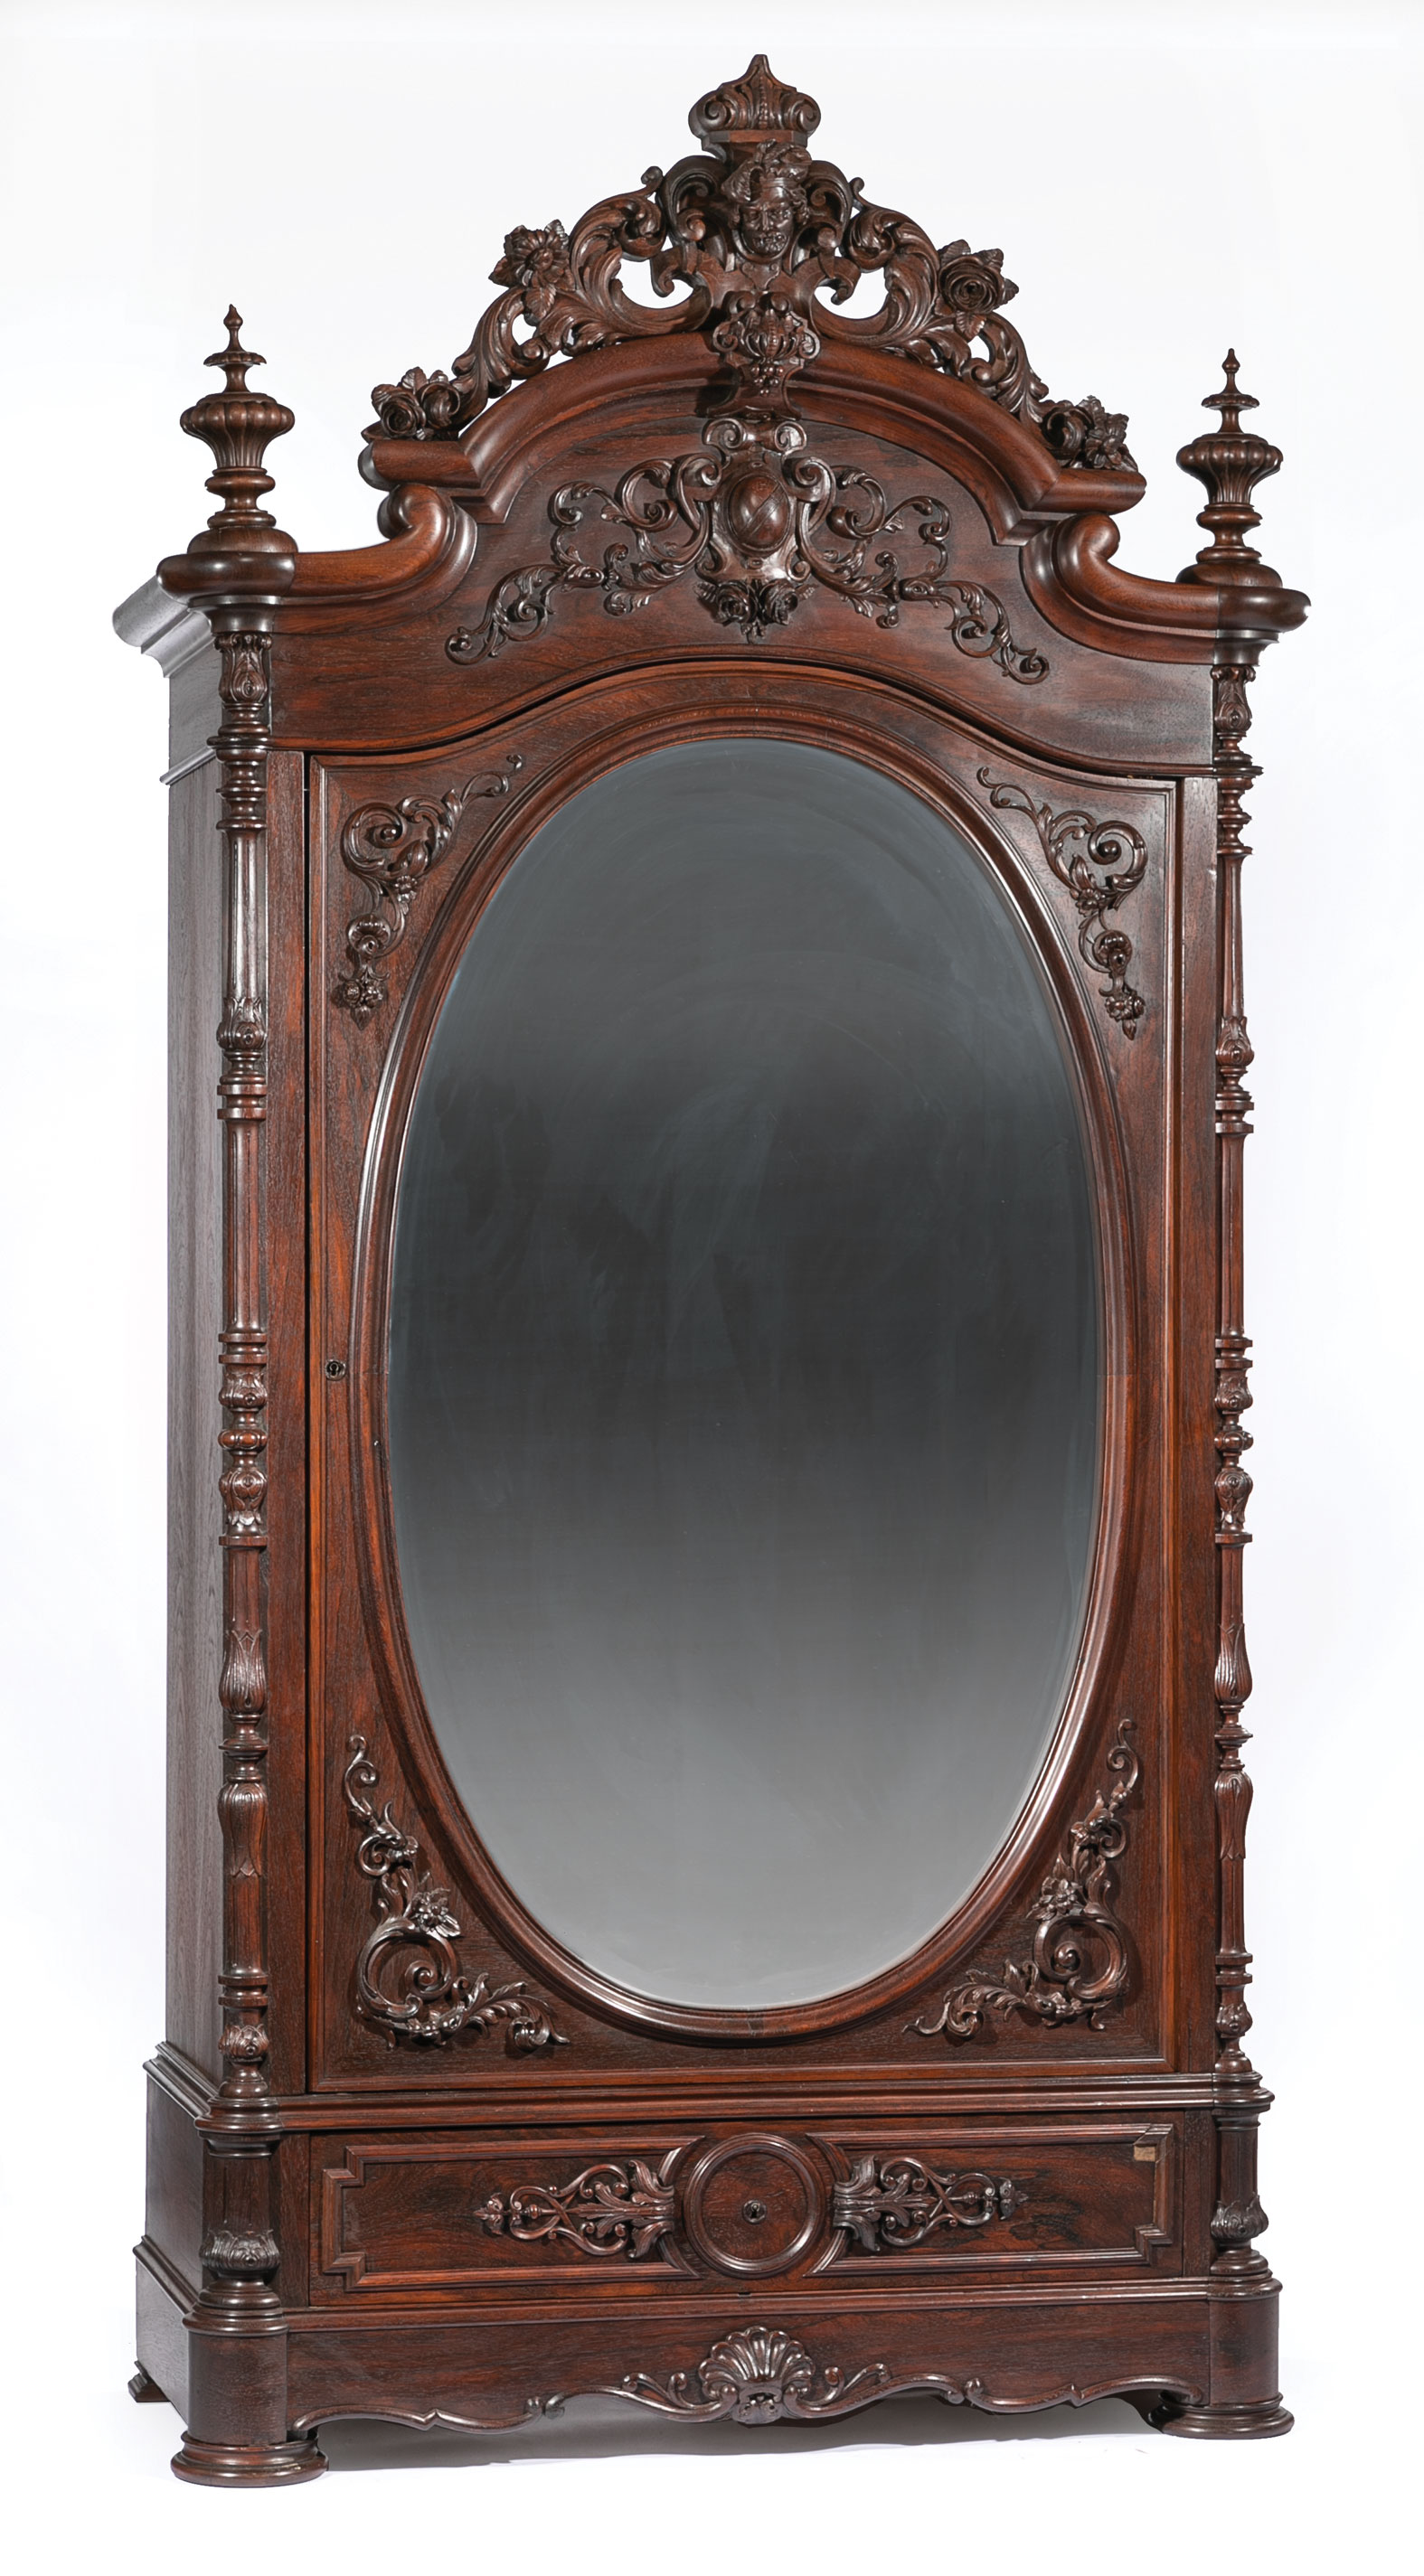 Very Fine American Carved Rosewood Bedroom Suite , mid-19th c., labeled A. (Alexander) Roux, incl. - Image 7 of 20